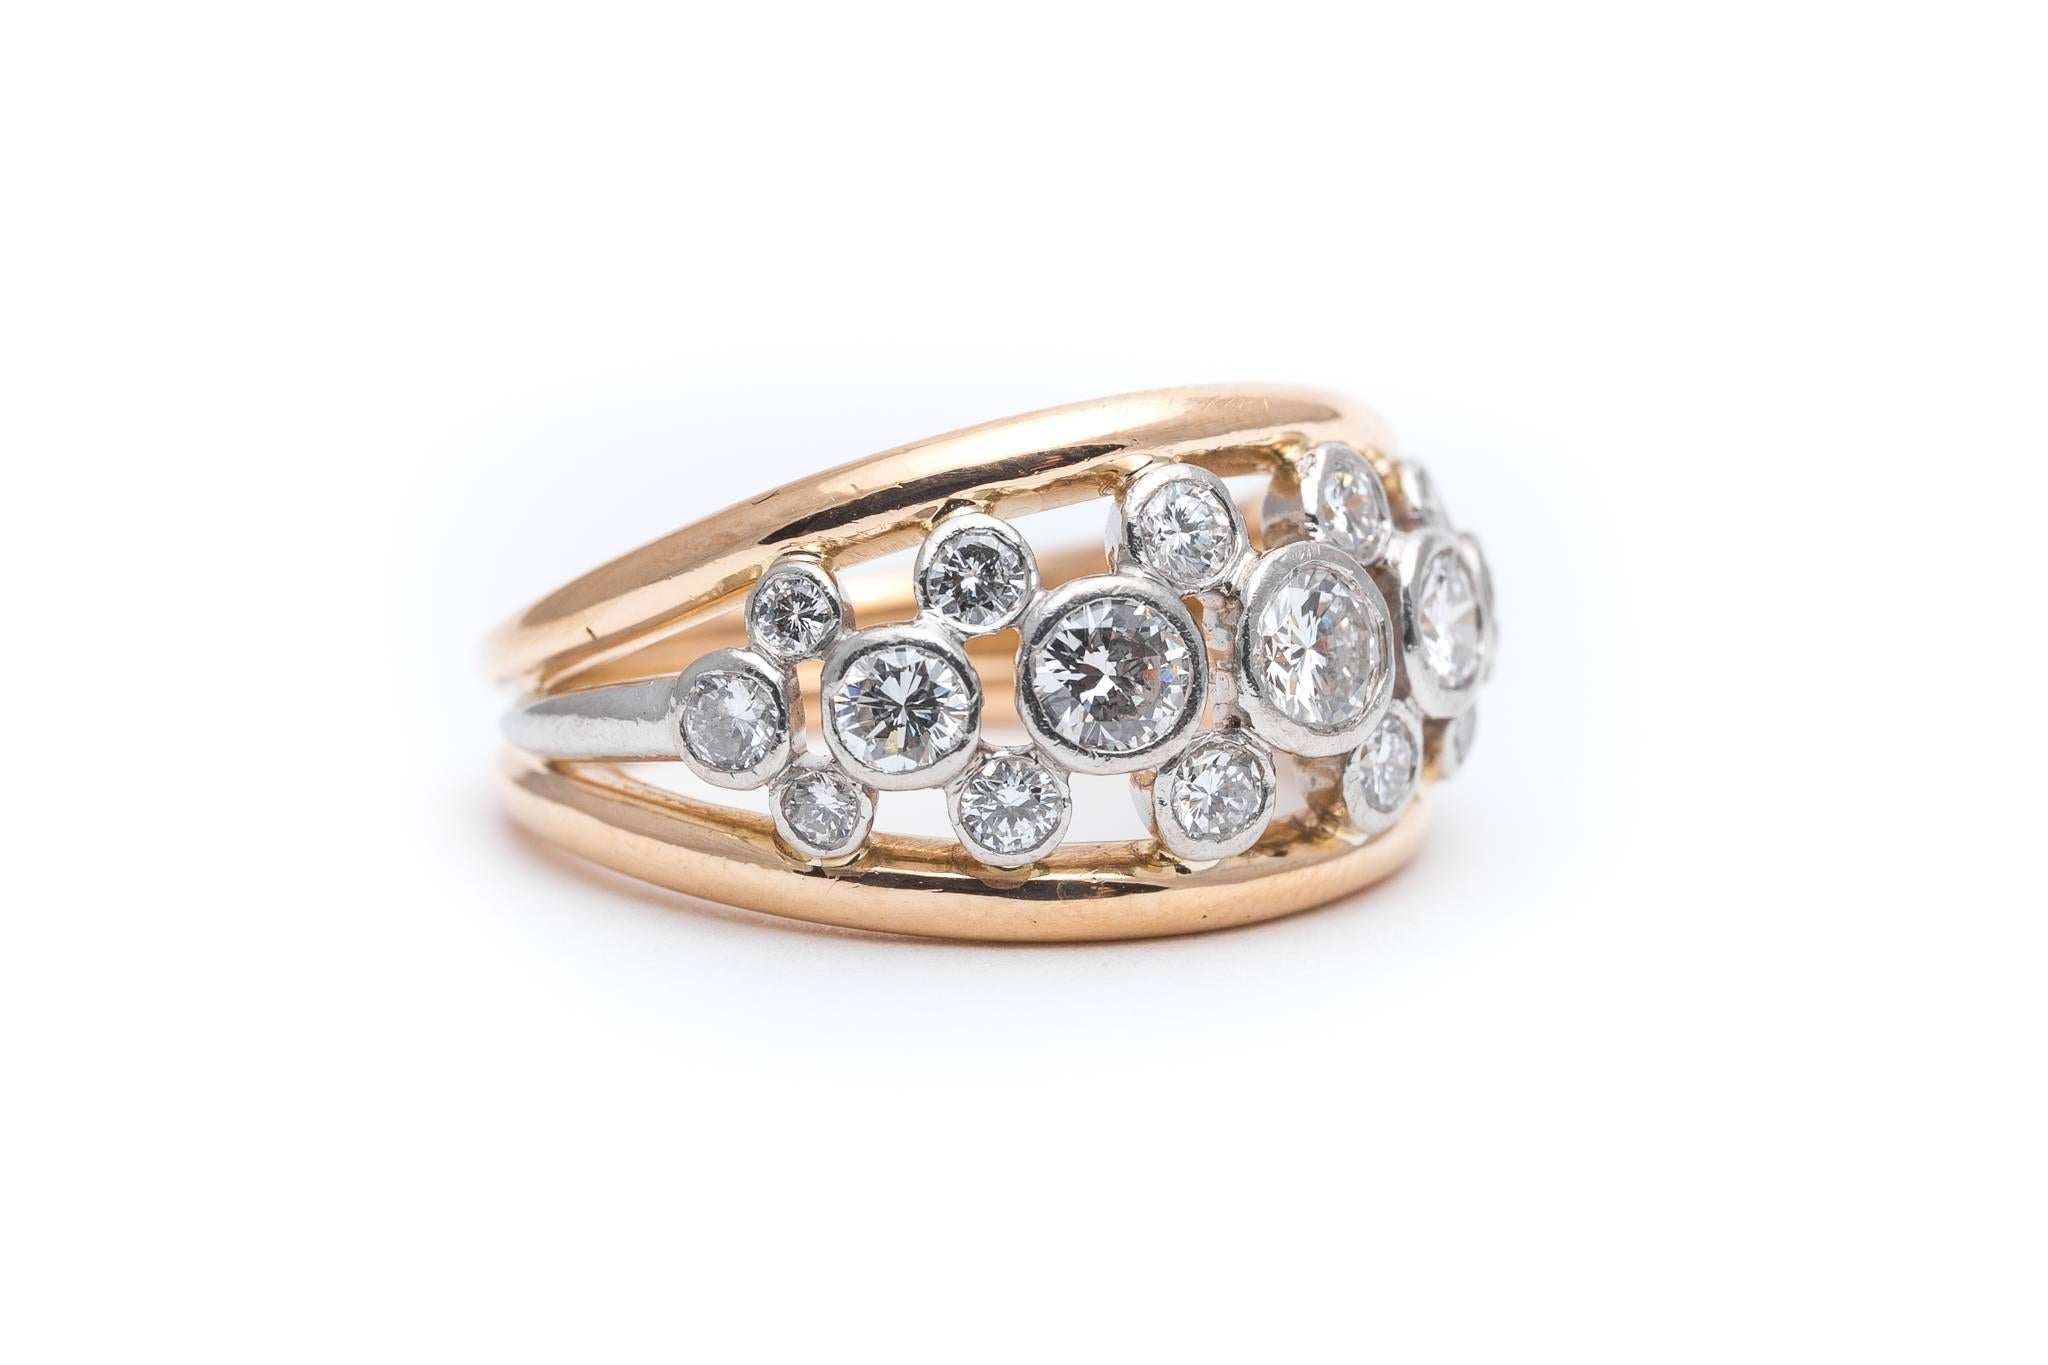 Beacon Hill Jewelers Presents:

A Tiffany & Co. Bubbles diamond platinum and 18 karat yellow gold ring Featuring sparkling brilliant cut diamonds set in brightly polished platinum between two bands of 18 karat yellow gold, this is a classic